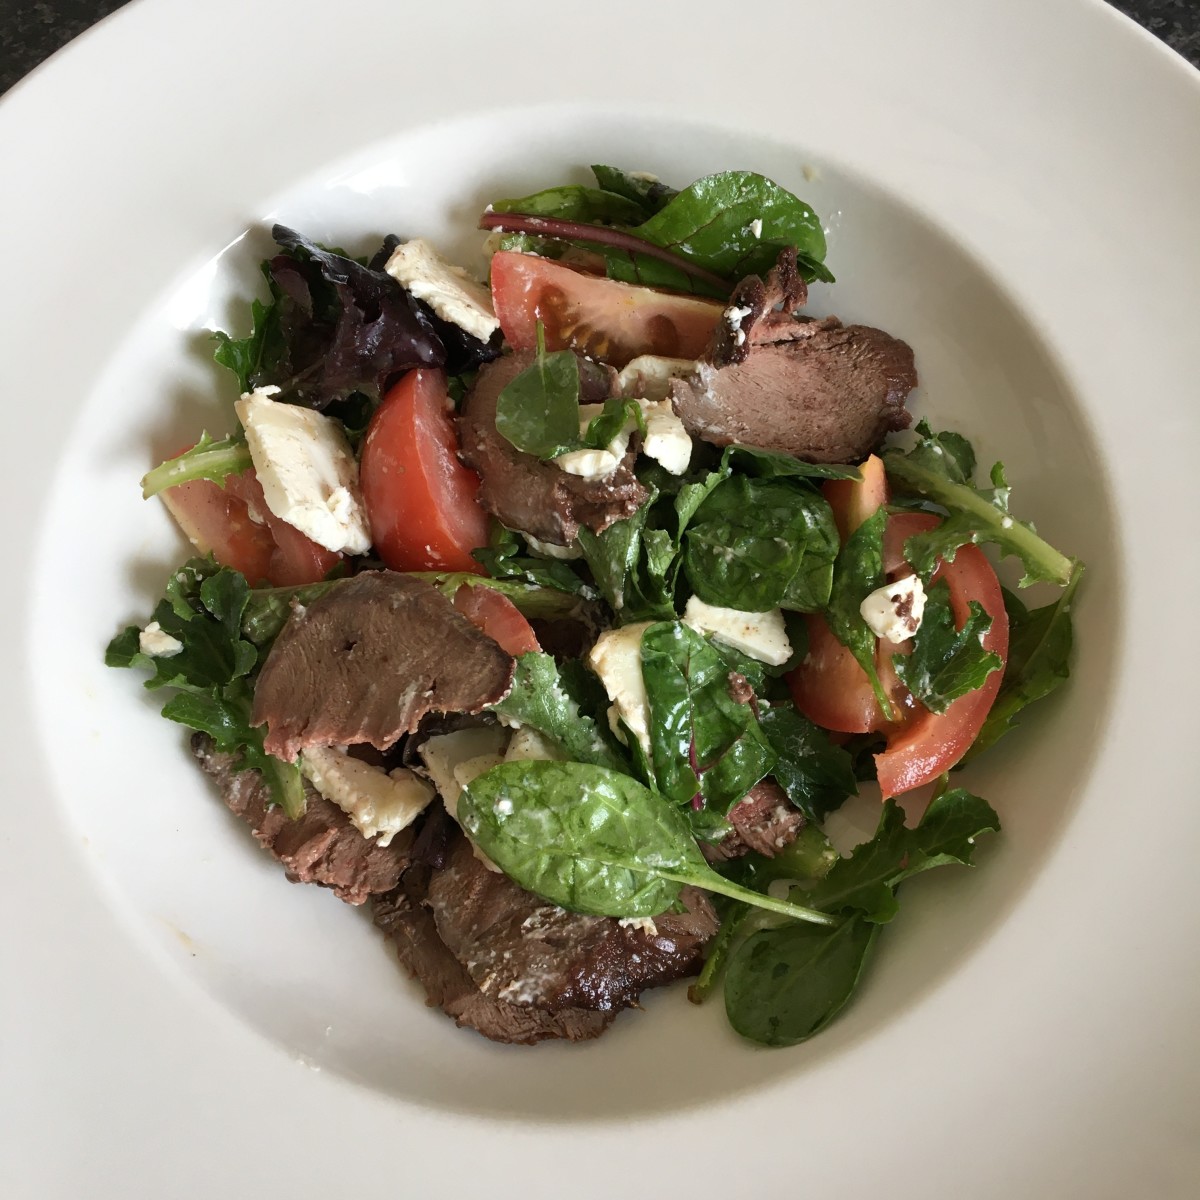 Cold pigeon breast flakes and goat cheese in a mixed leaf salad